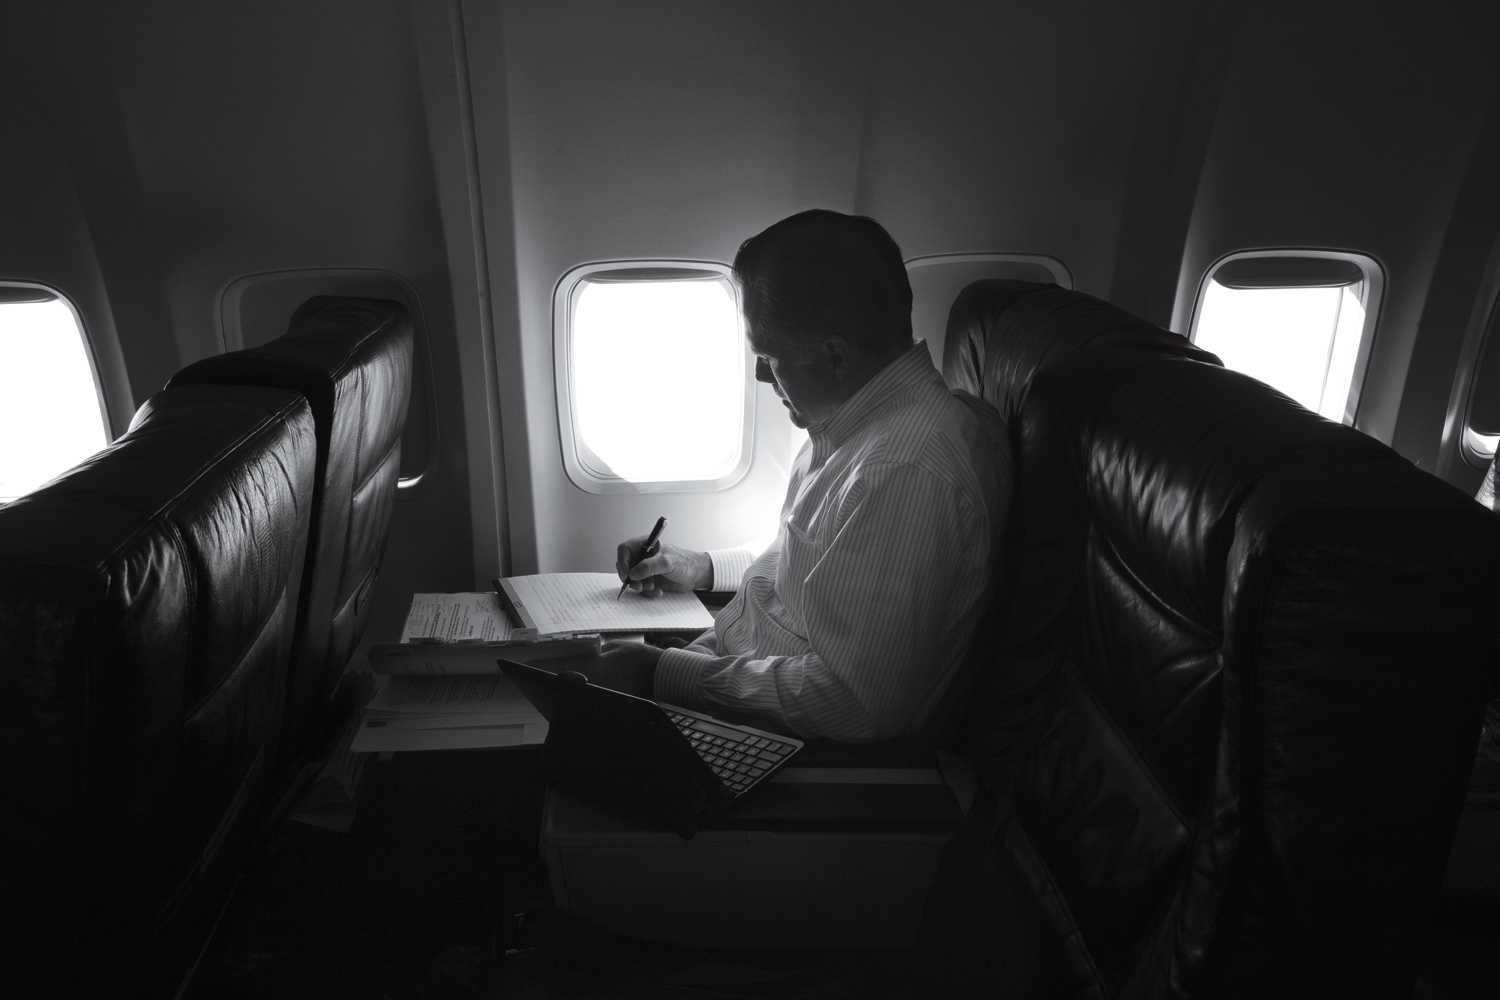 Image: Mitt Romney, in a quiet moment, works on the plane heading towards events in New Orleans. Aug. 20, 2012.